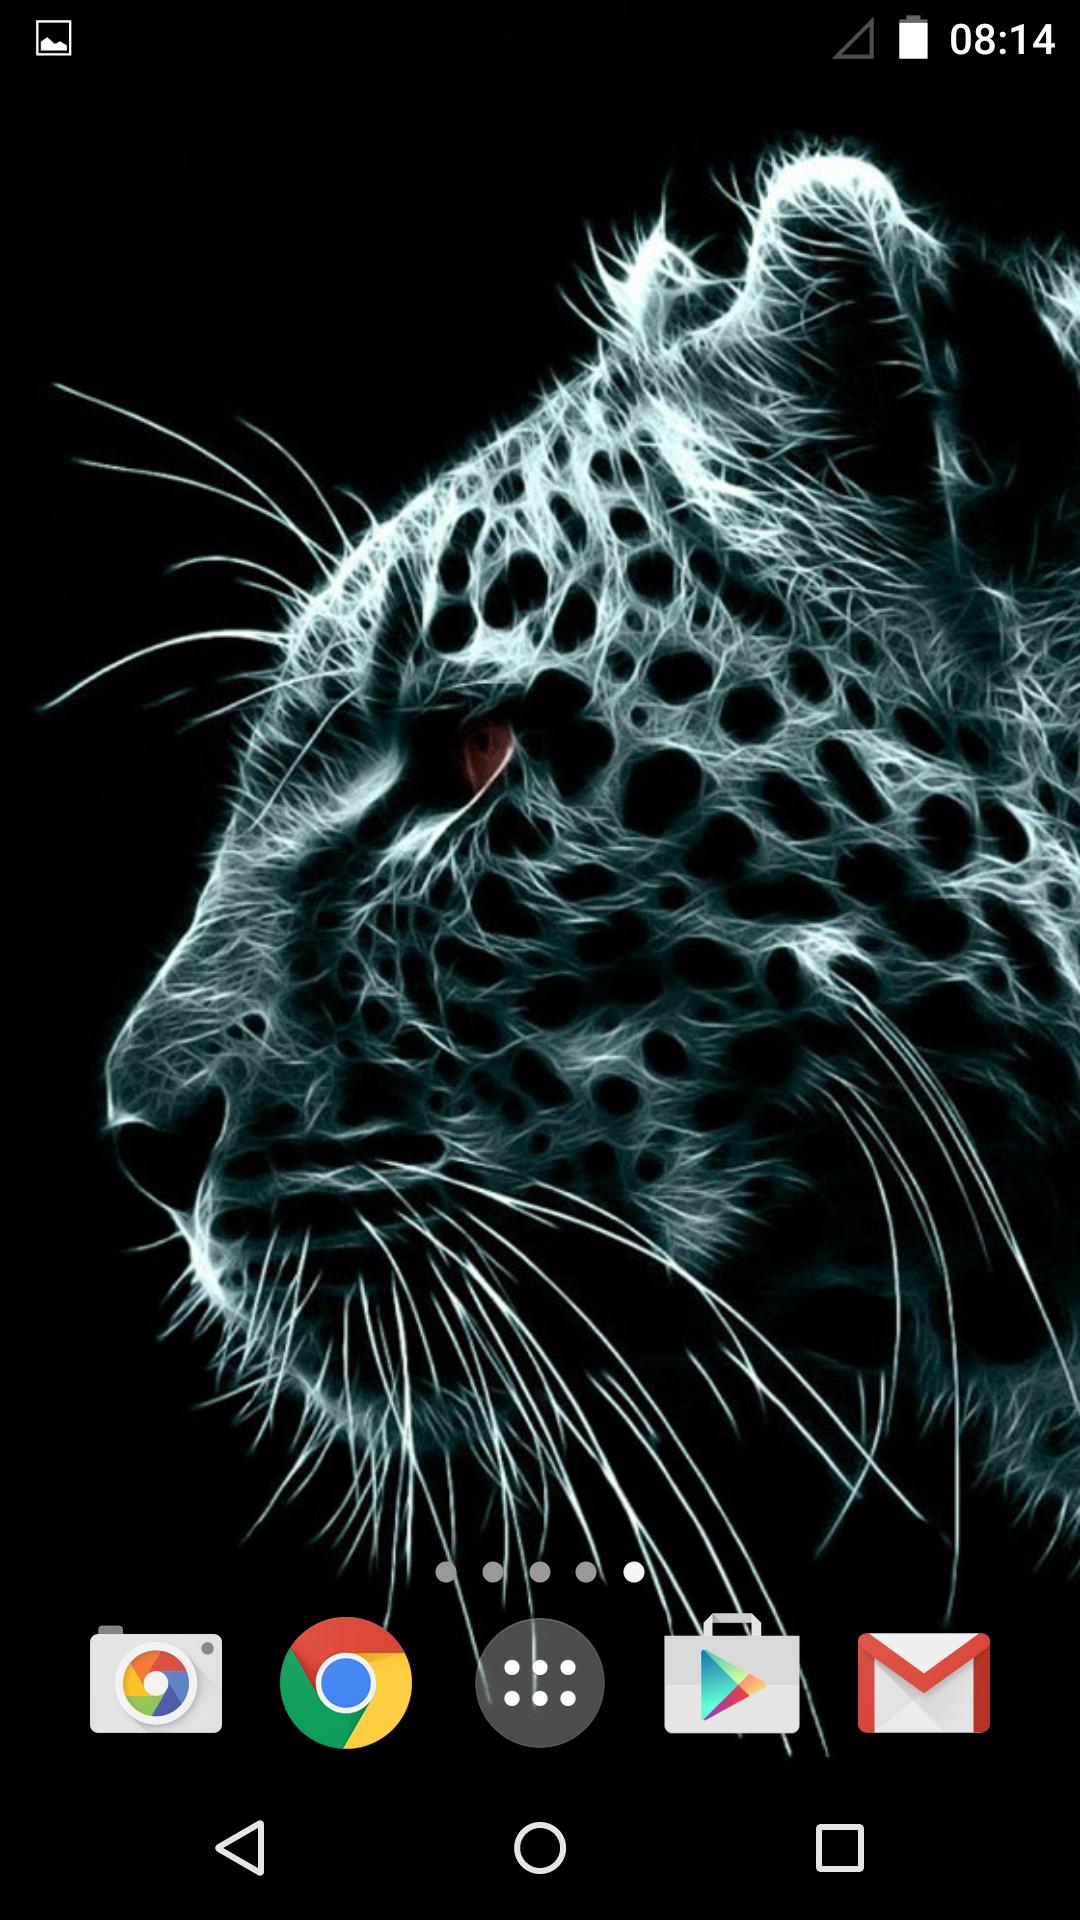 3d Wallpaper For Android Animal Image Num 5